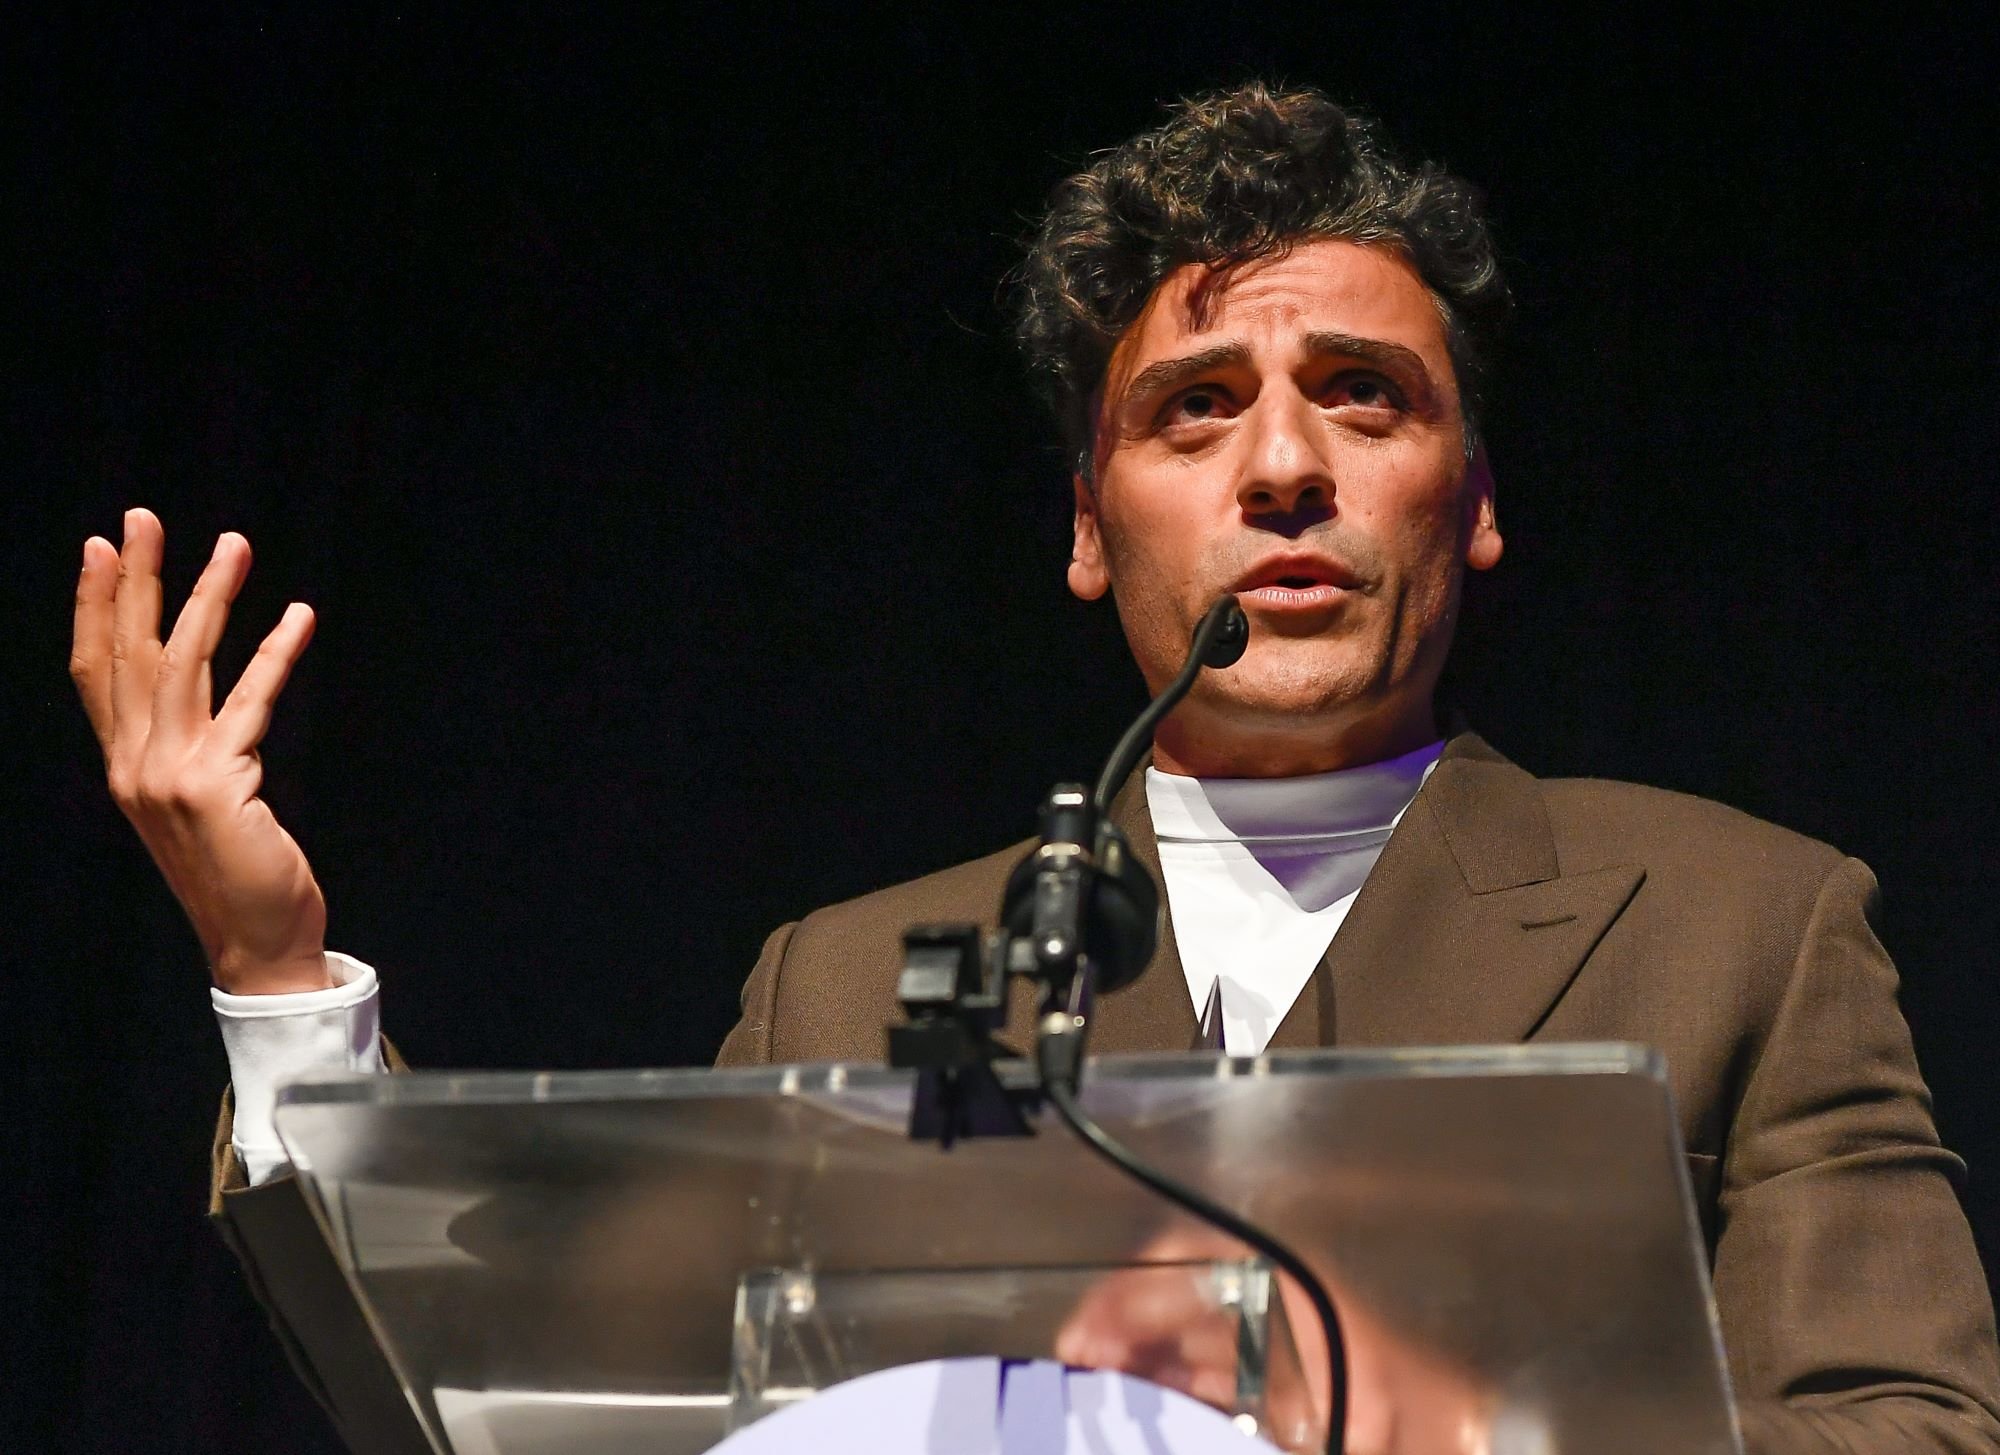 Oscar Isaac, who stars alongside Ethan Hawke in 'Moon Knight,' wears a brown suit over a white shirt while speaking at a podium.